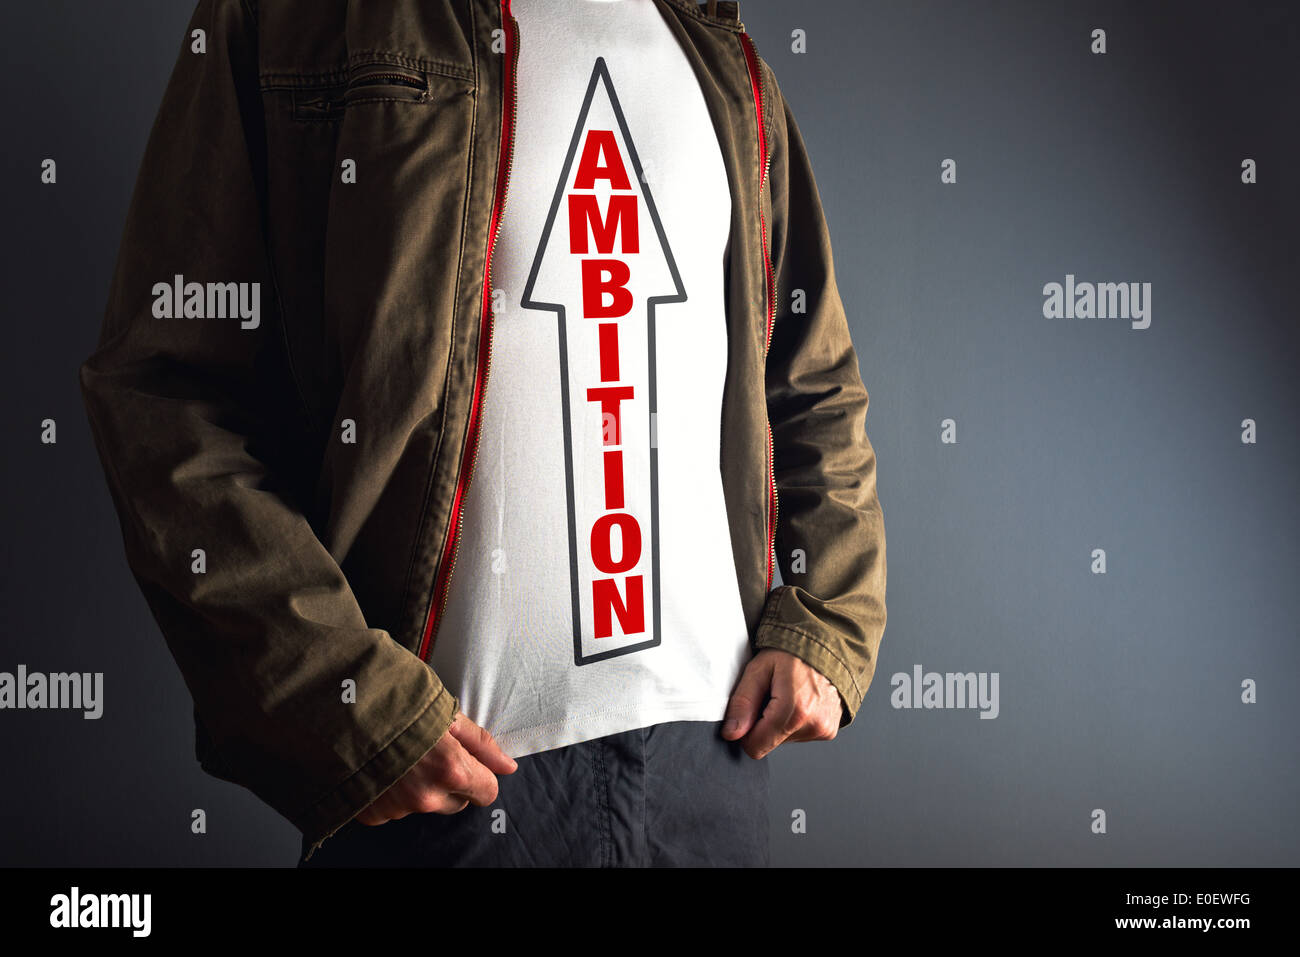 Man wearing white shirt with title ambition. Aspiration and initiative concept. Stock Photo